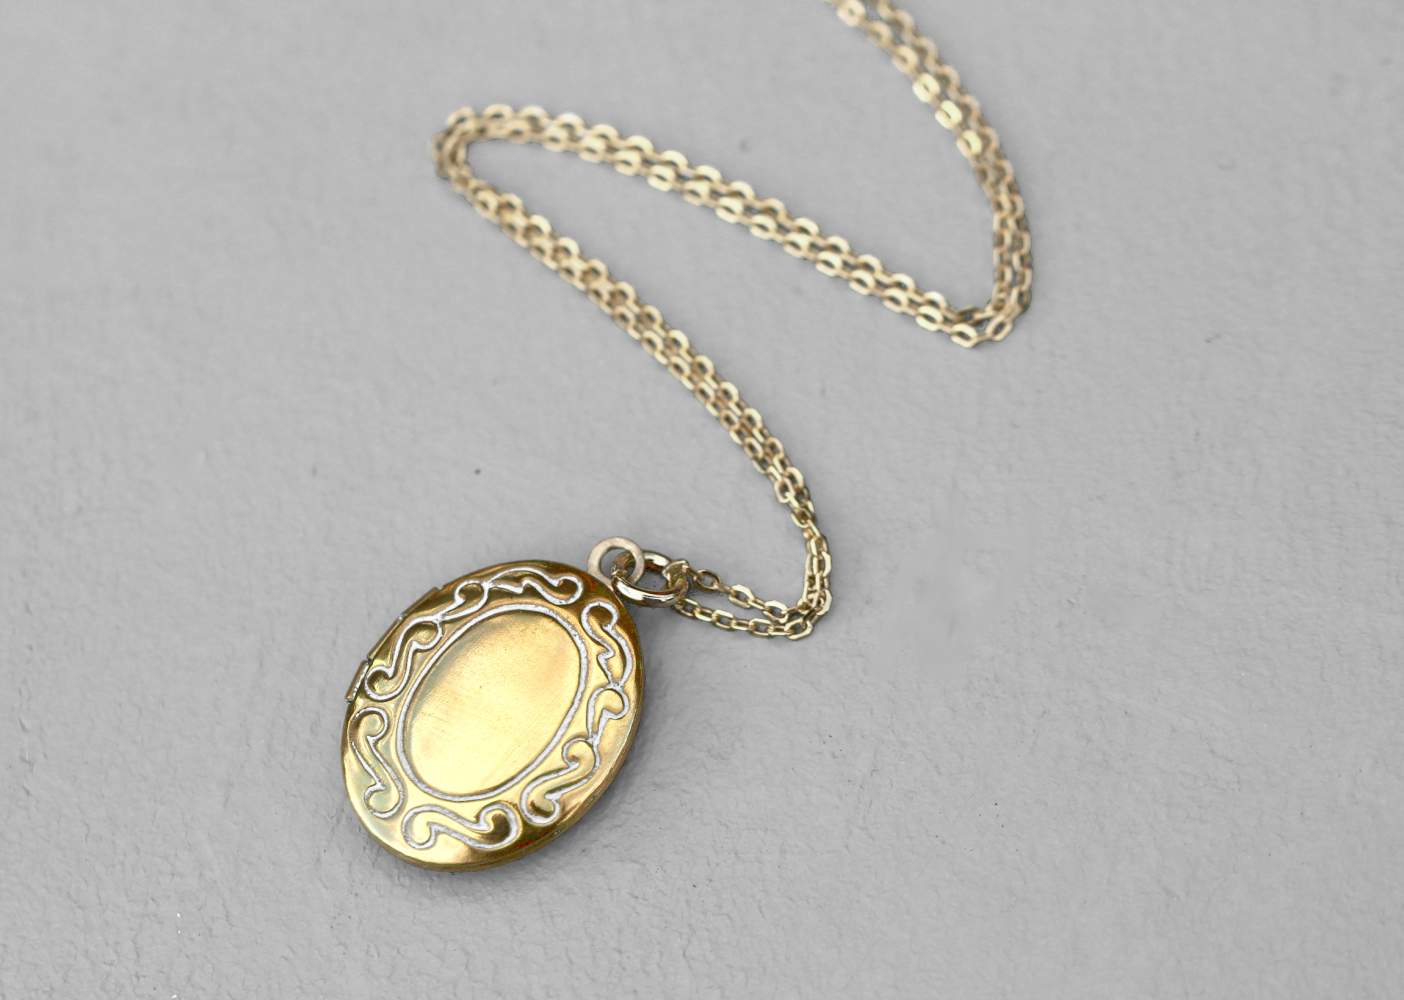 Dainty gold locket necklace with white ornaments. Layering necklace